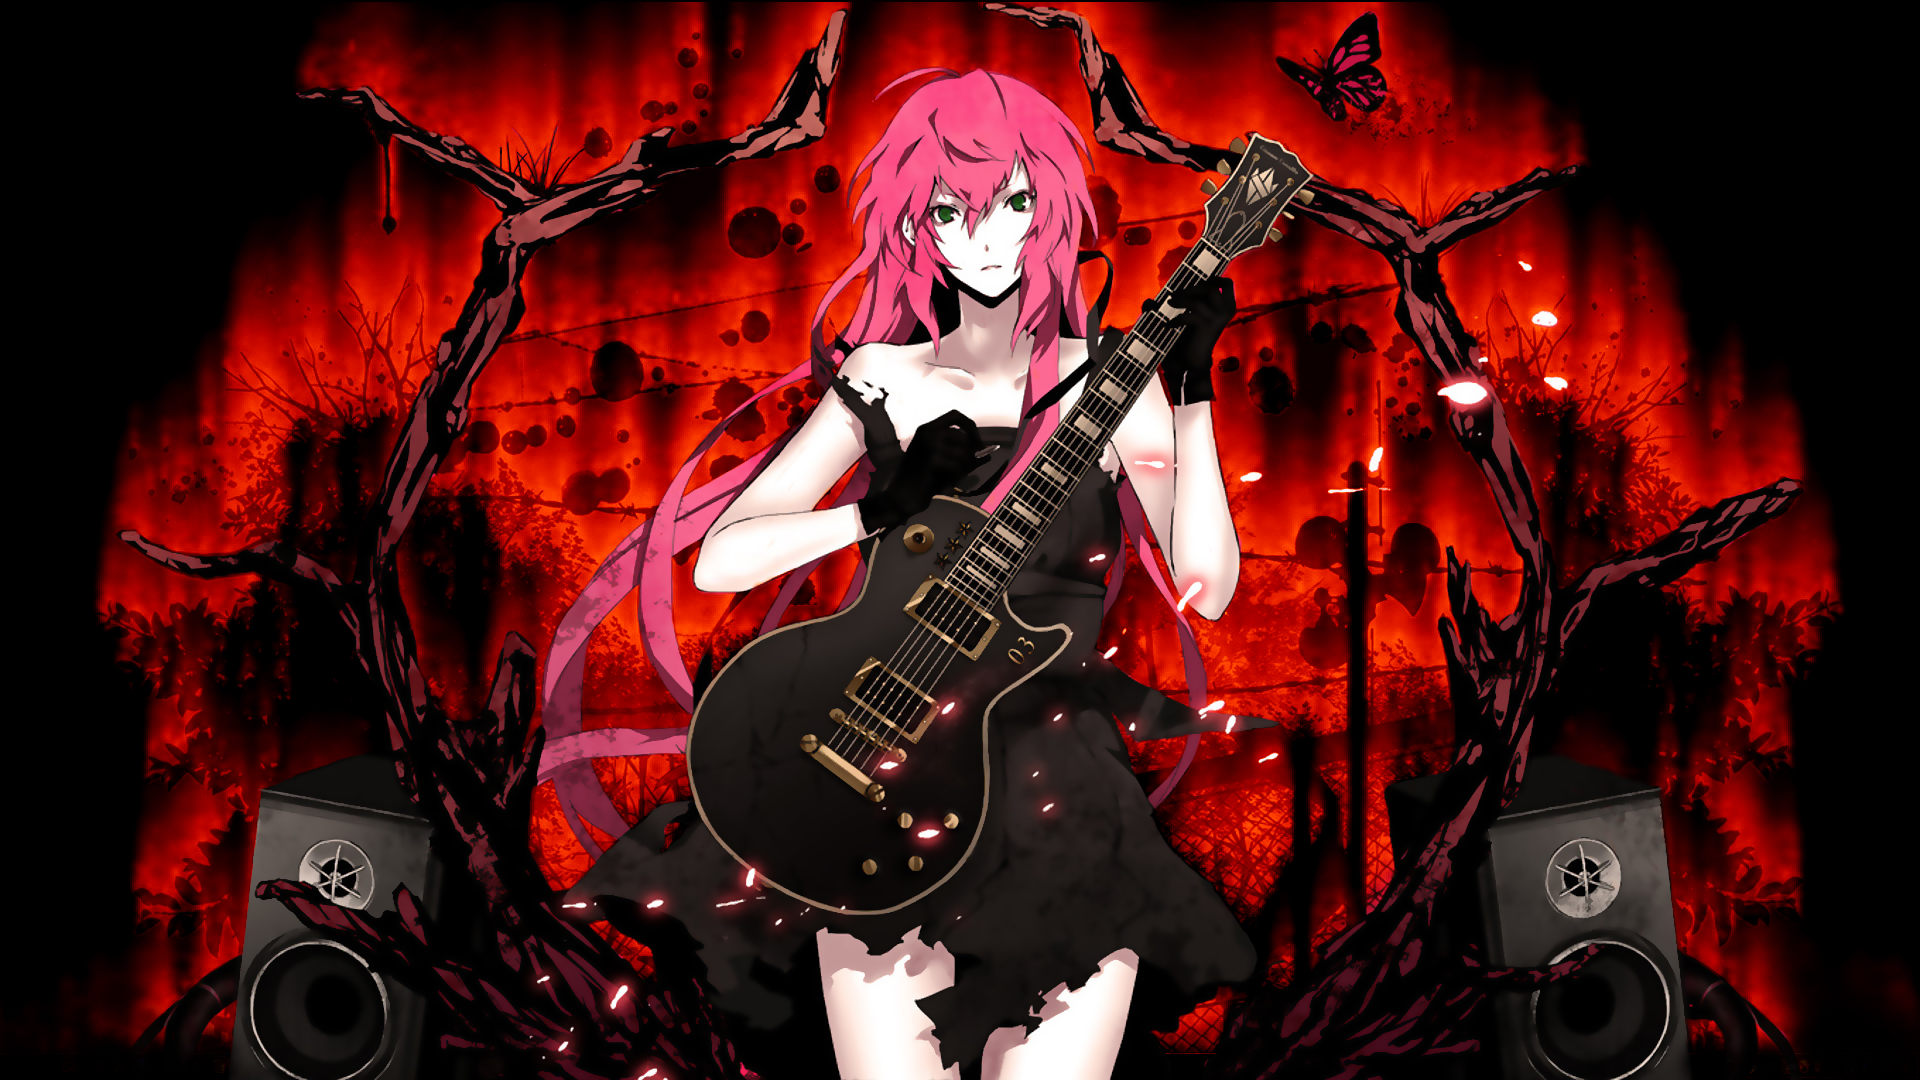 Wallpapers Luka Megurine In Flames Babe Fire Guitar 1920x1080